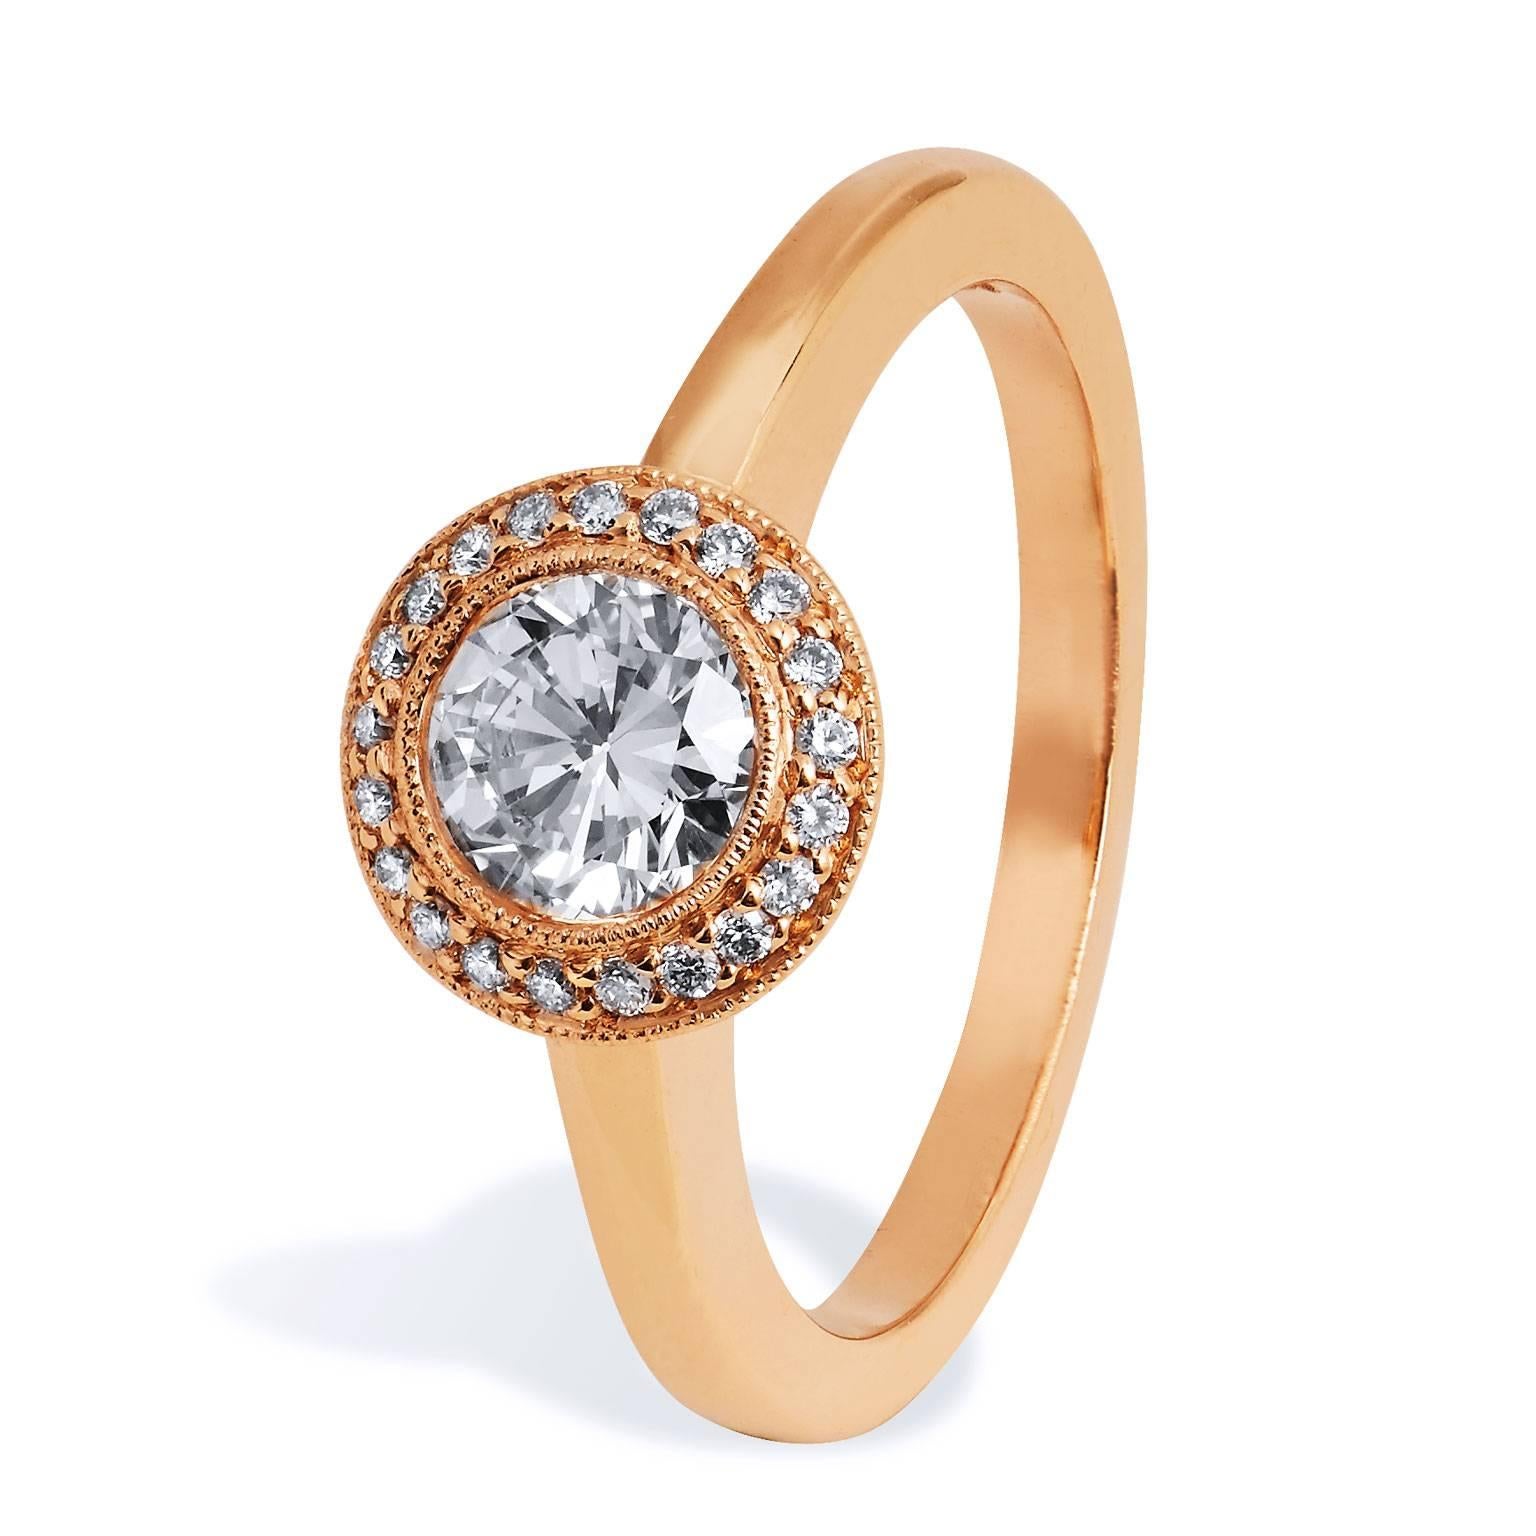 Handmade Round Brilliant Cut Diamond Gold Engagement Ring

Warm, rich rose gold smolders with luxury in this 14 karat rose gold 0.65 carat round brilliant cut diamond engagement ring. Twenty-one pieces of diamonds pave set (weighing 0.08 carats